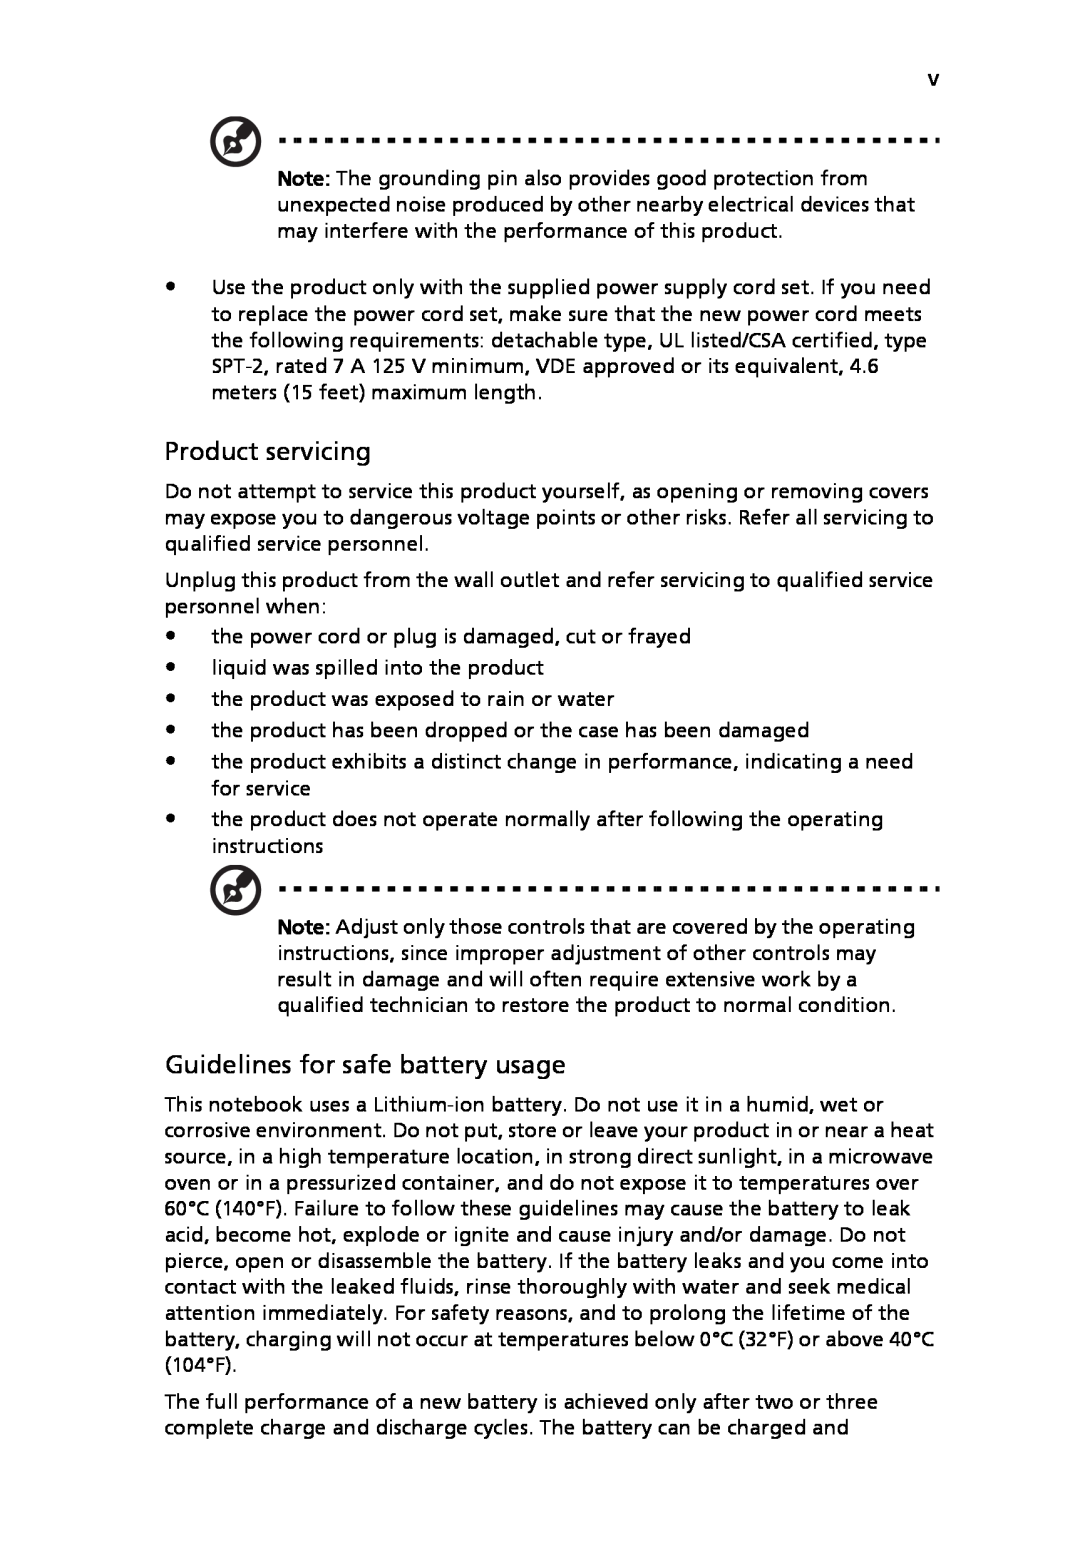 Acer MS2219, 4920 manual Product servicing, Guidelines for safe battery usage 